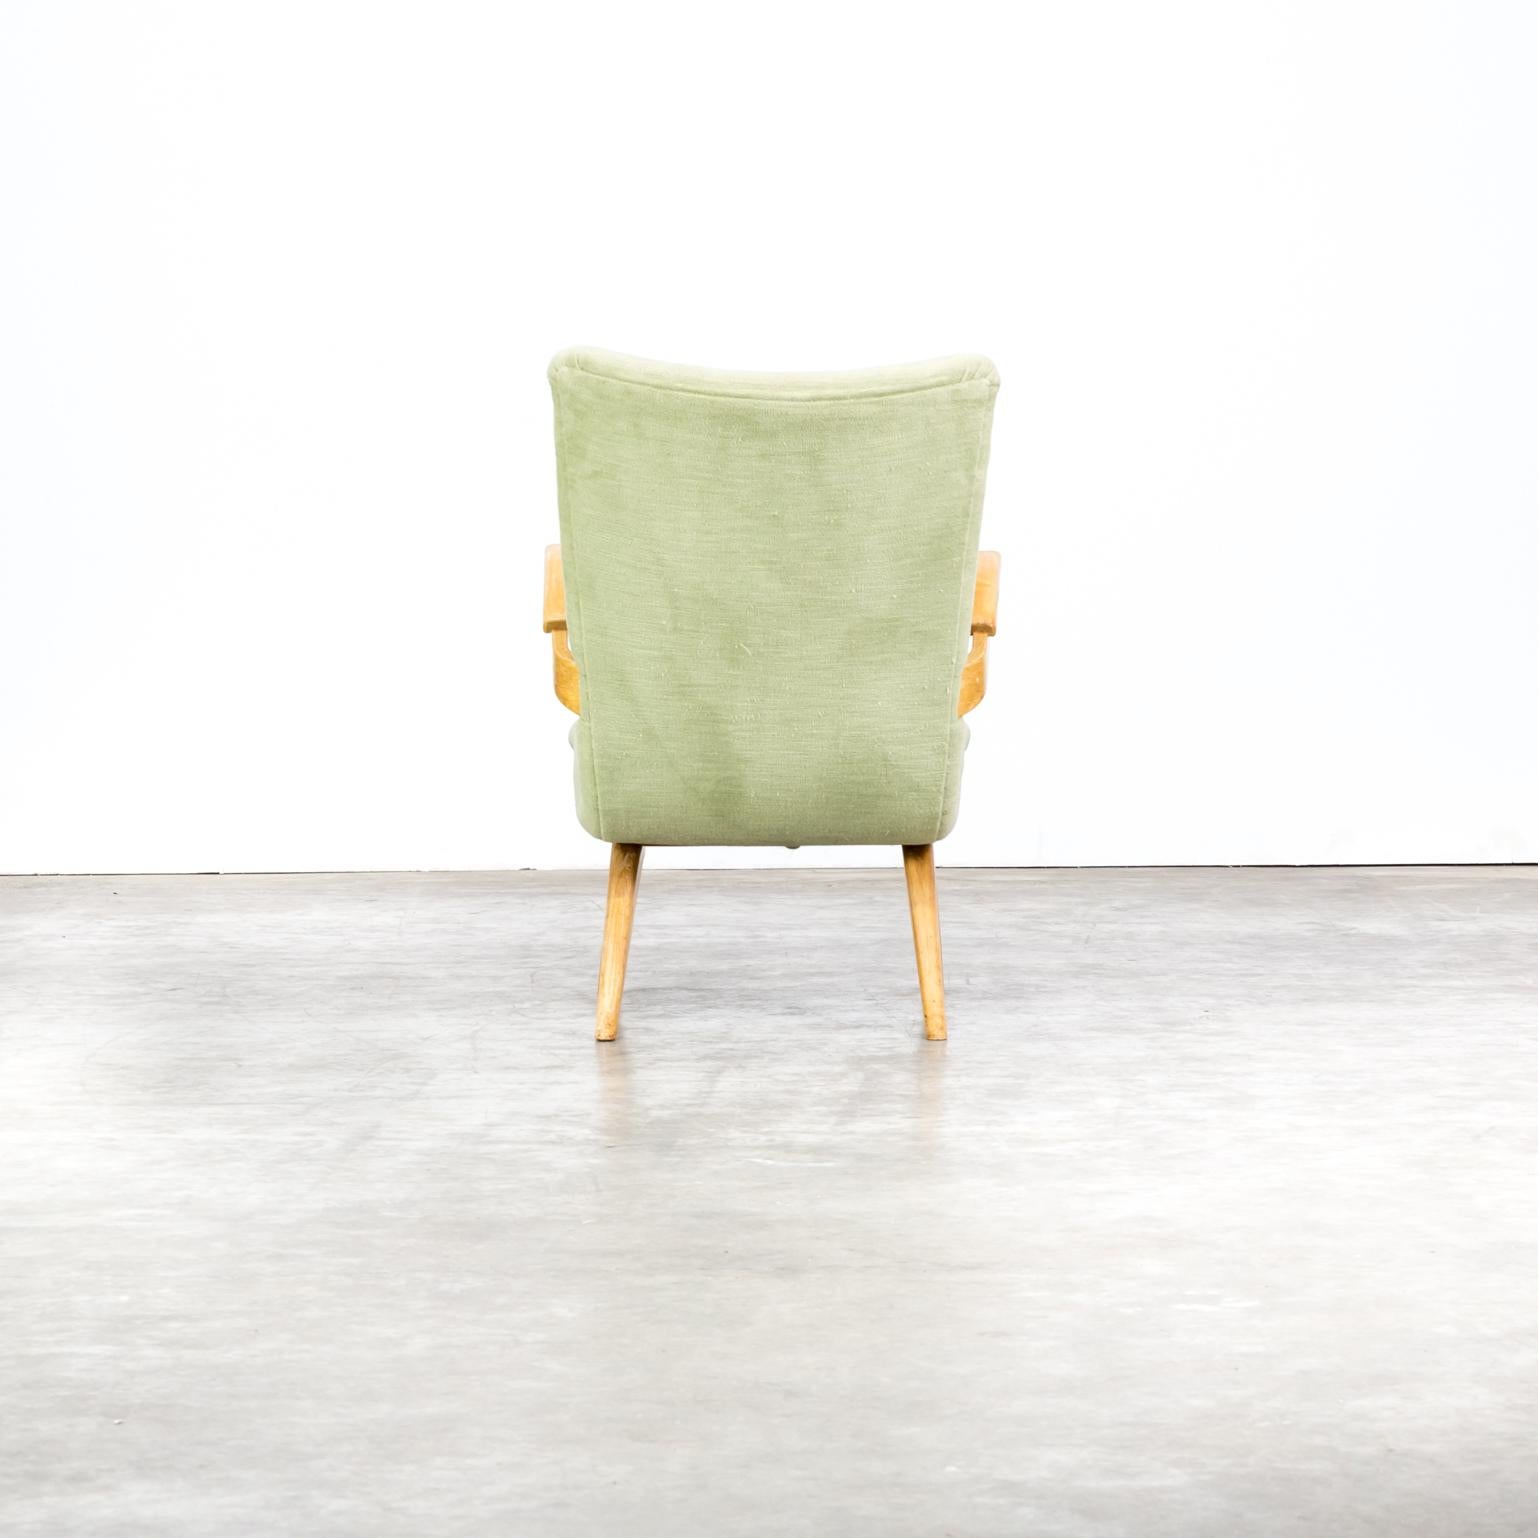 Mid-20th Century 1950s G. Van Os Lounge Chair for Van Os Culemborg